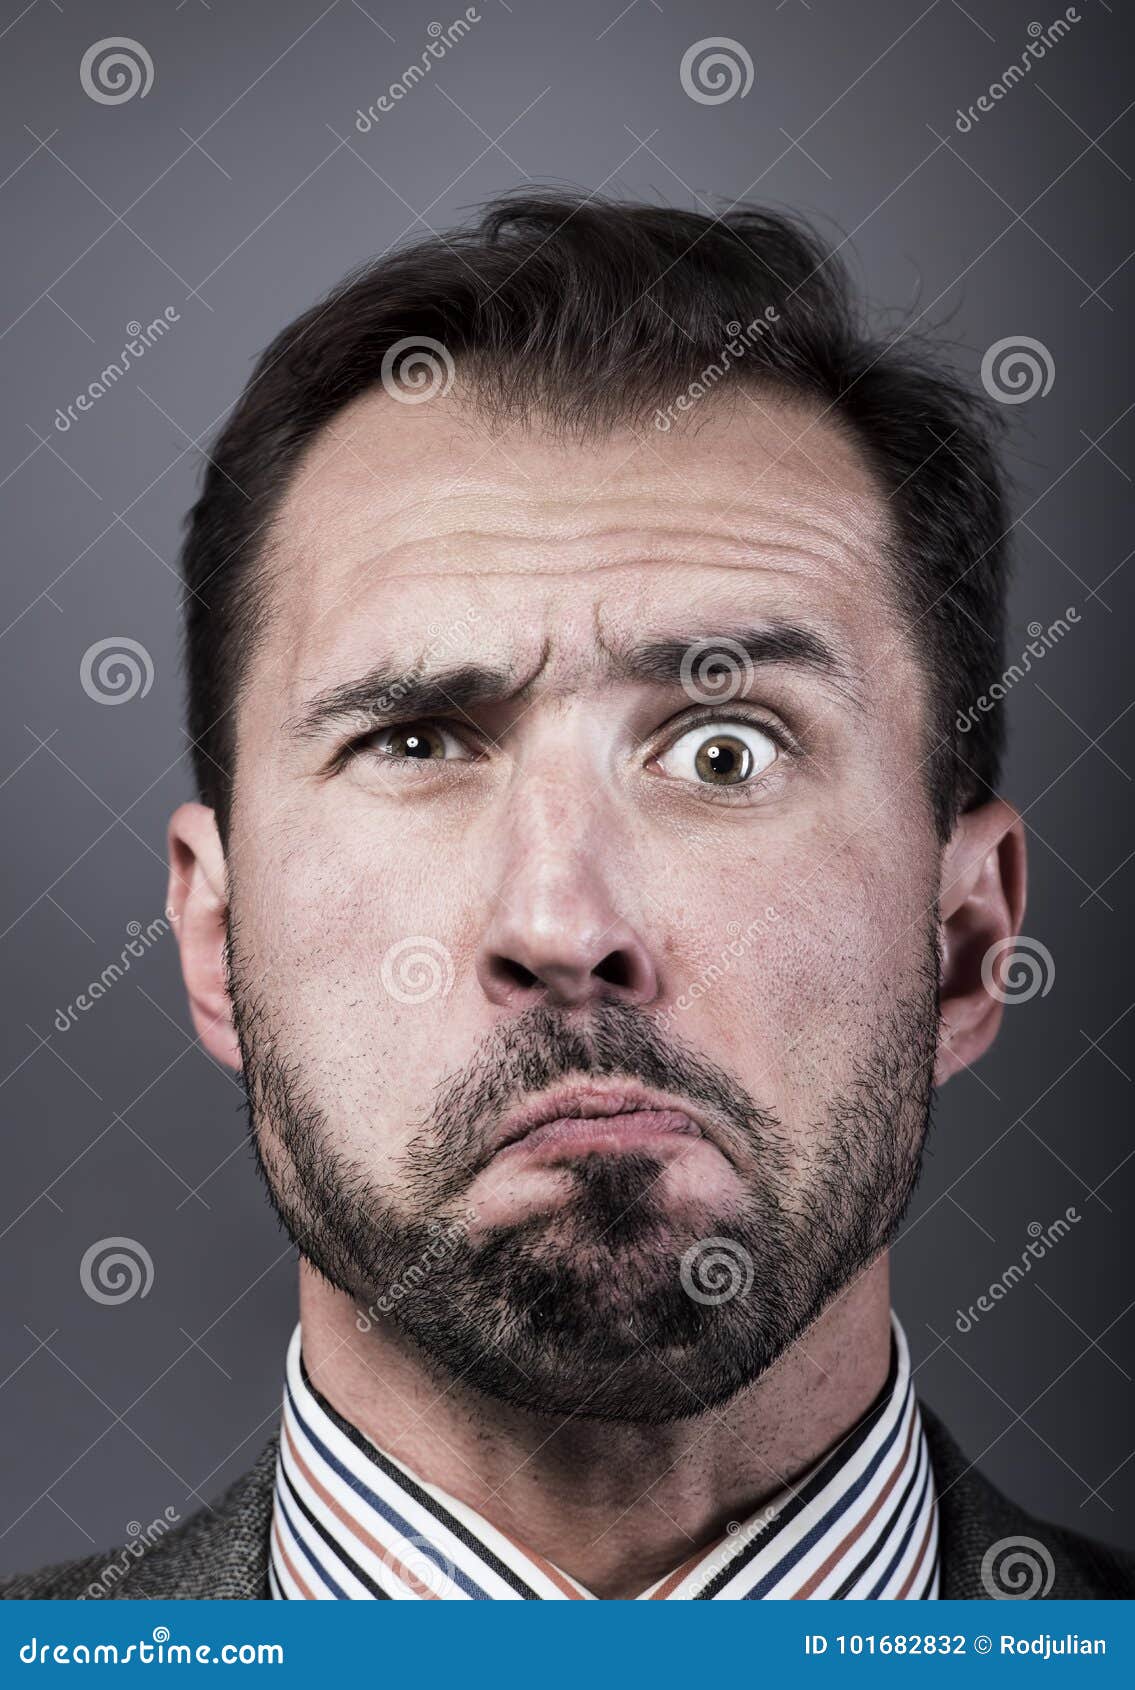 Man Portrait with a Strange Expression Stock Photo - Image of facial ...